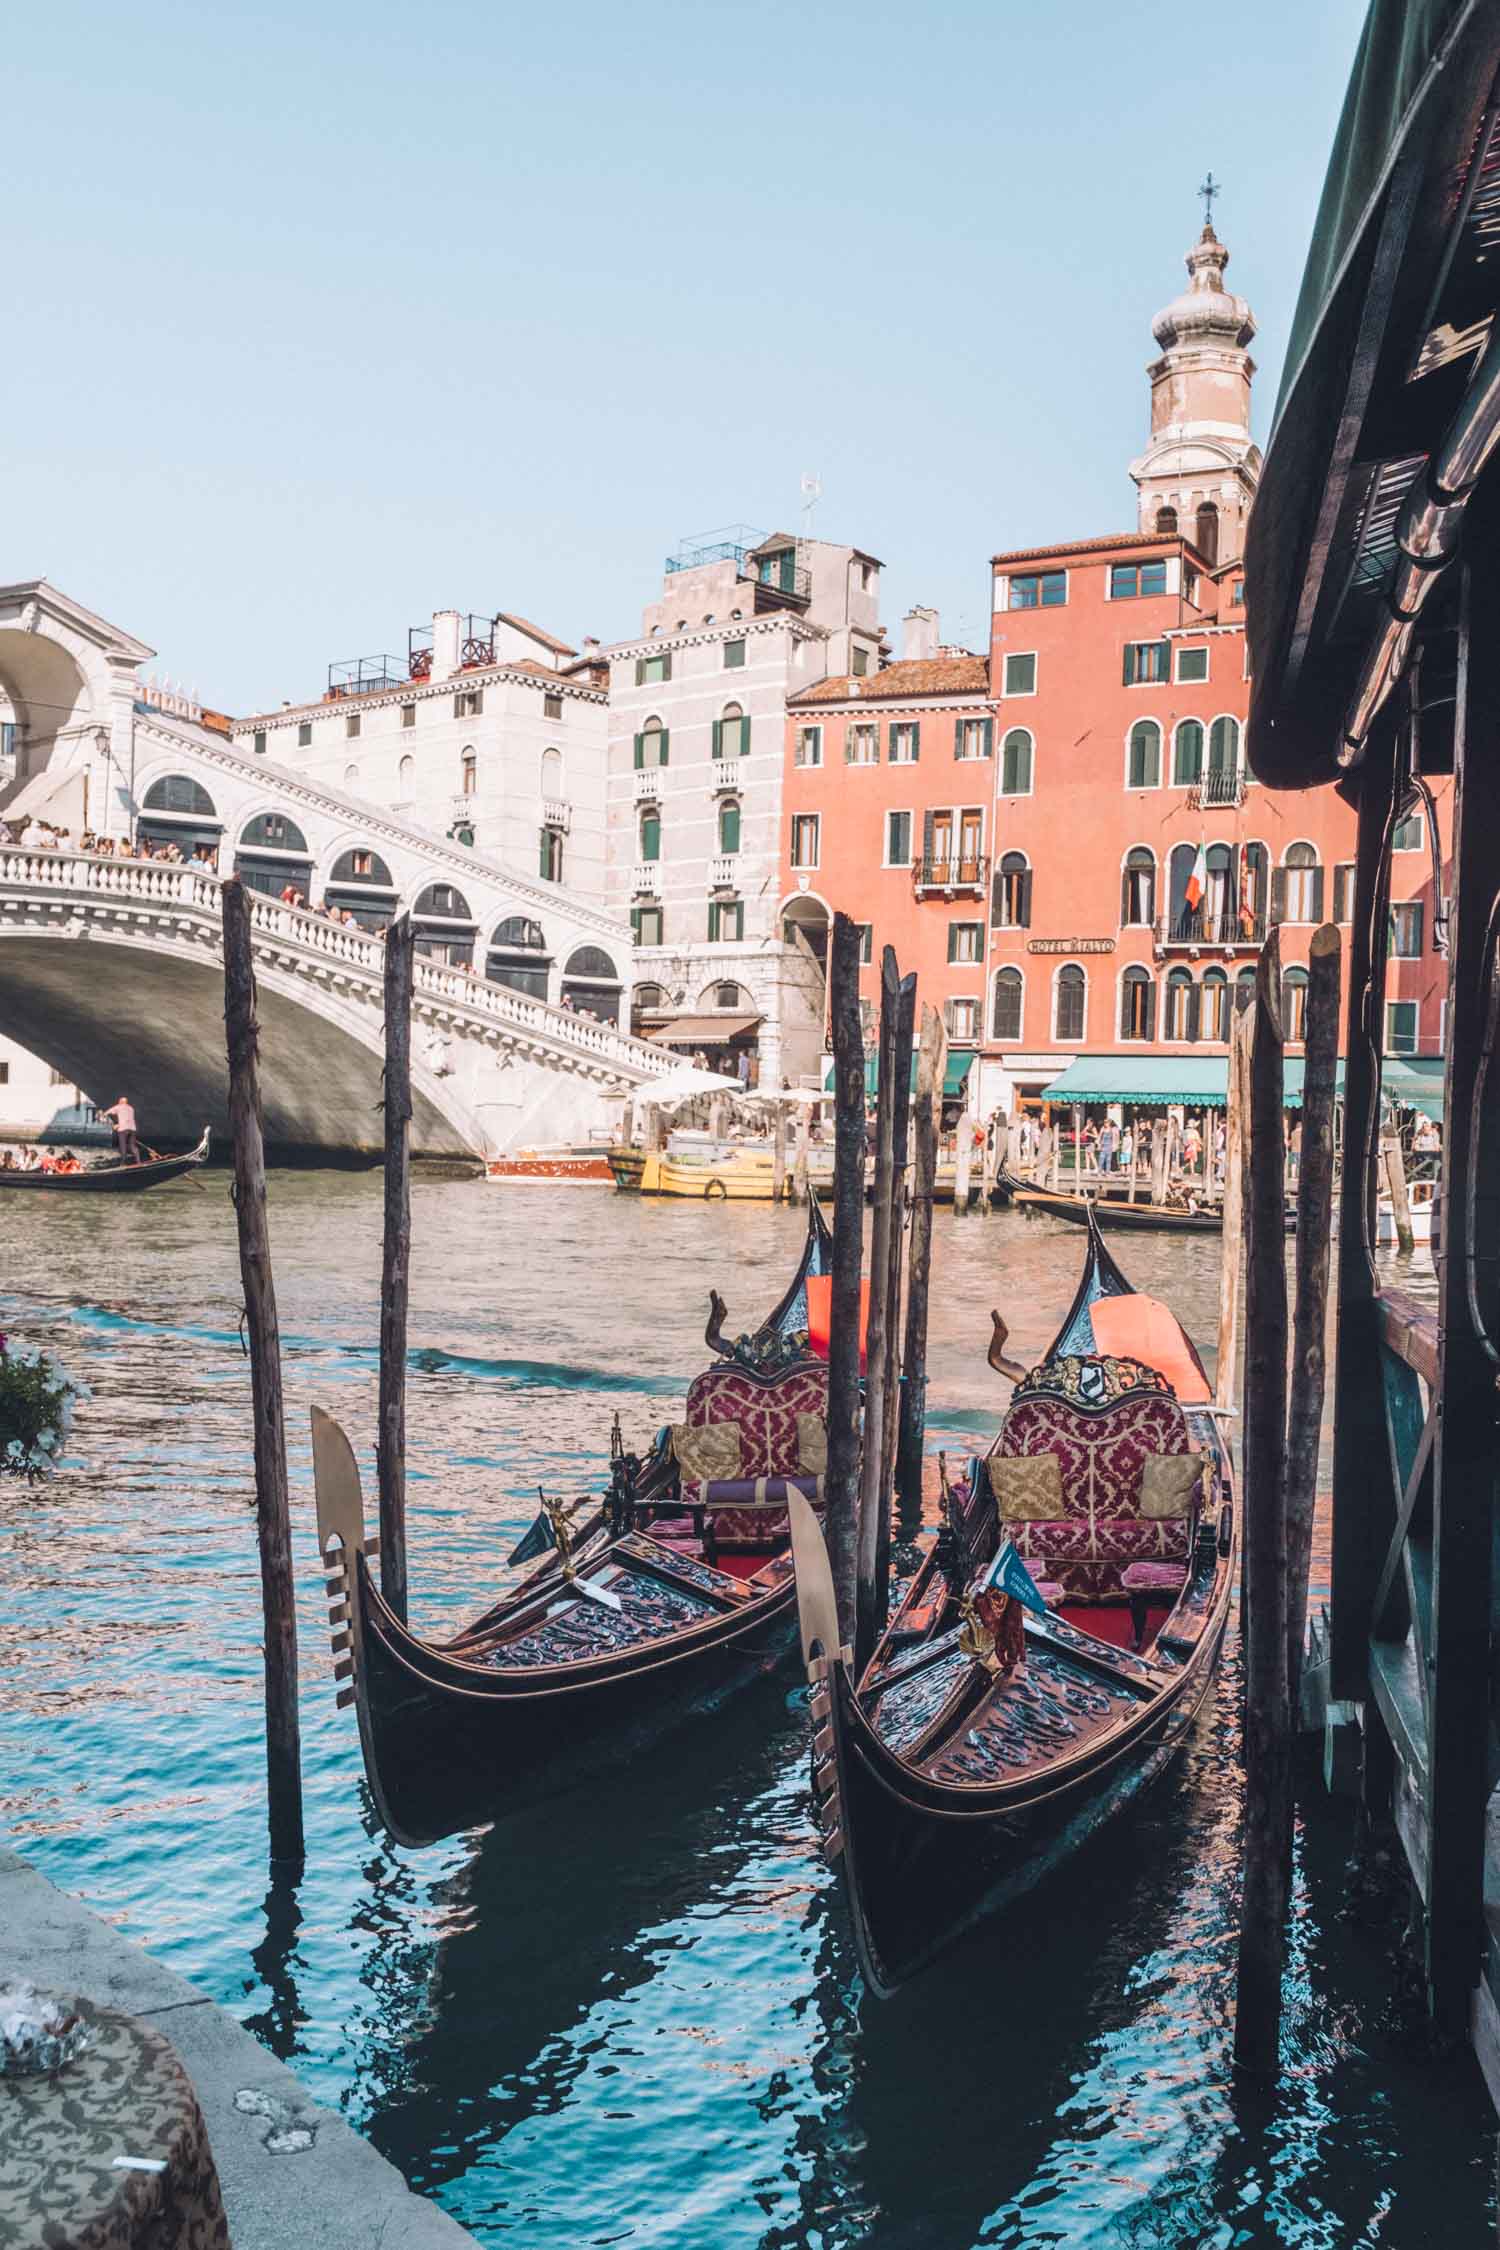 20 Photos to Inspire You to Visit Italy • The Blonde Abroad